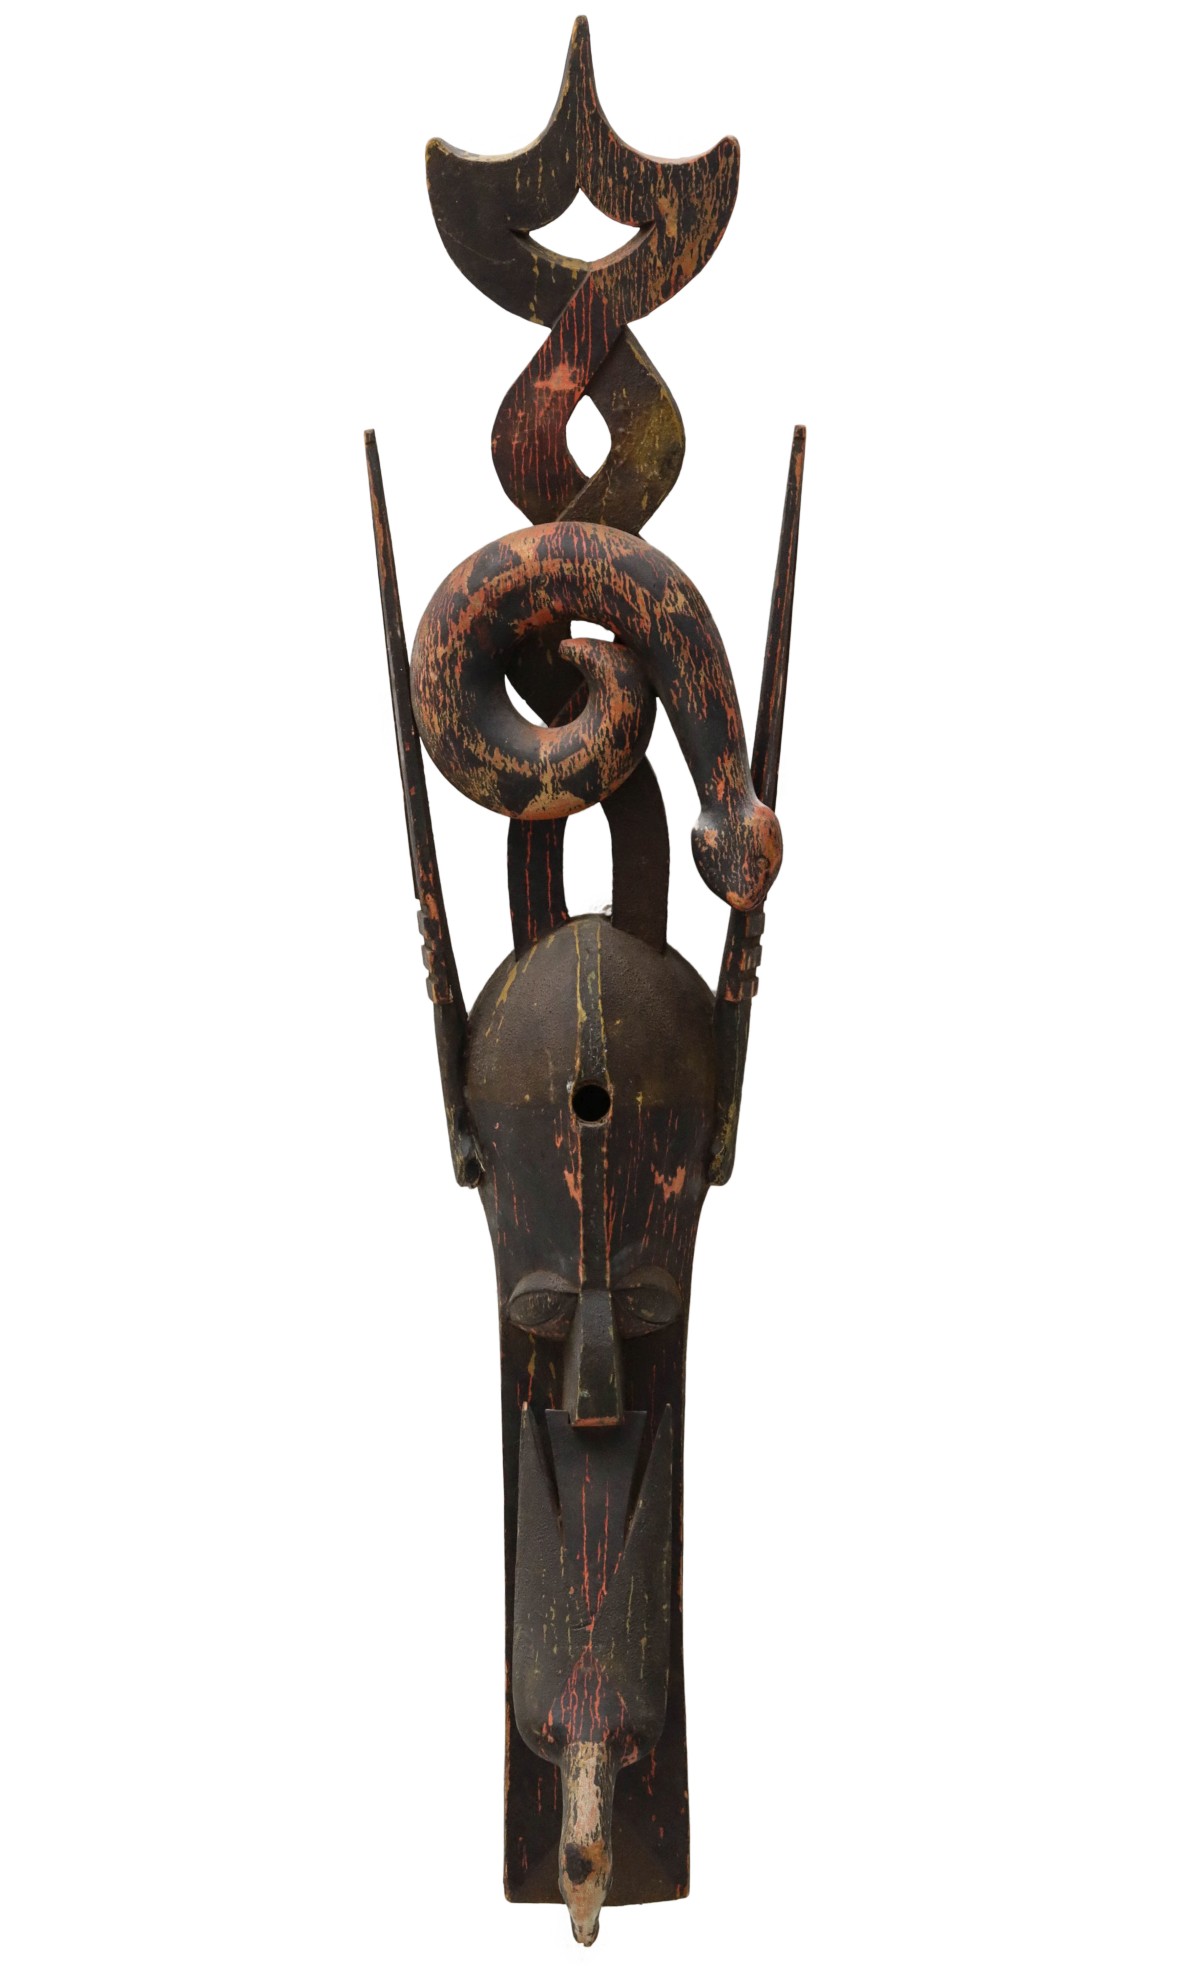 A CARVED AND PAINTED NIGERIAN IJAW WATER SPIRIT MASK